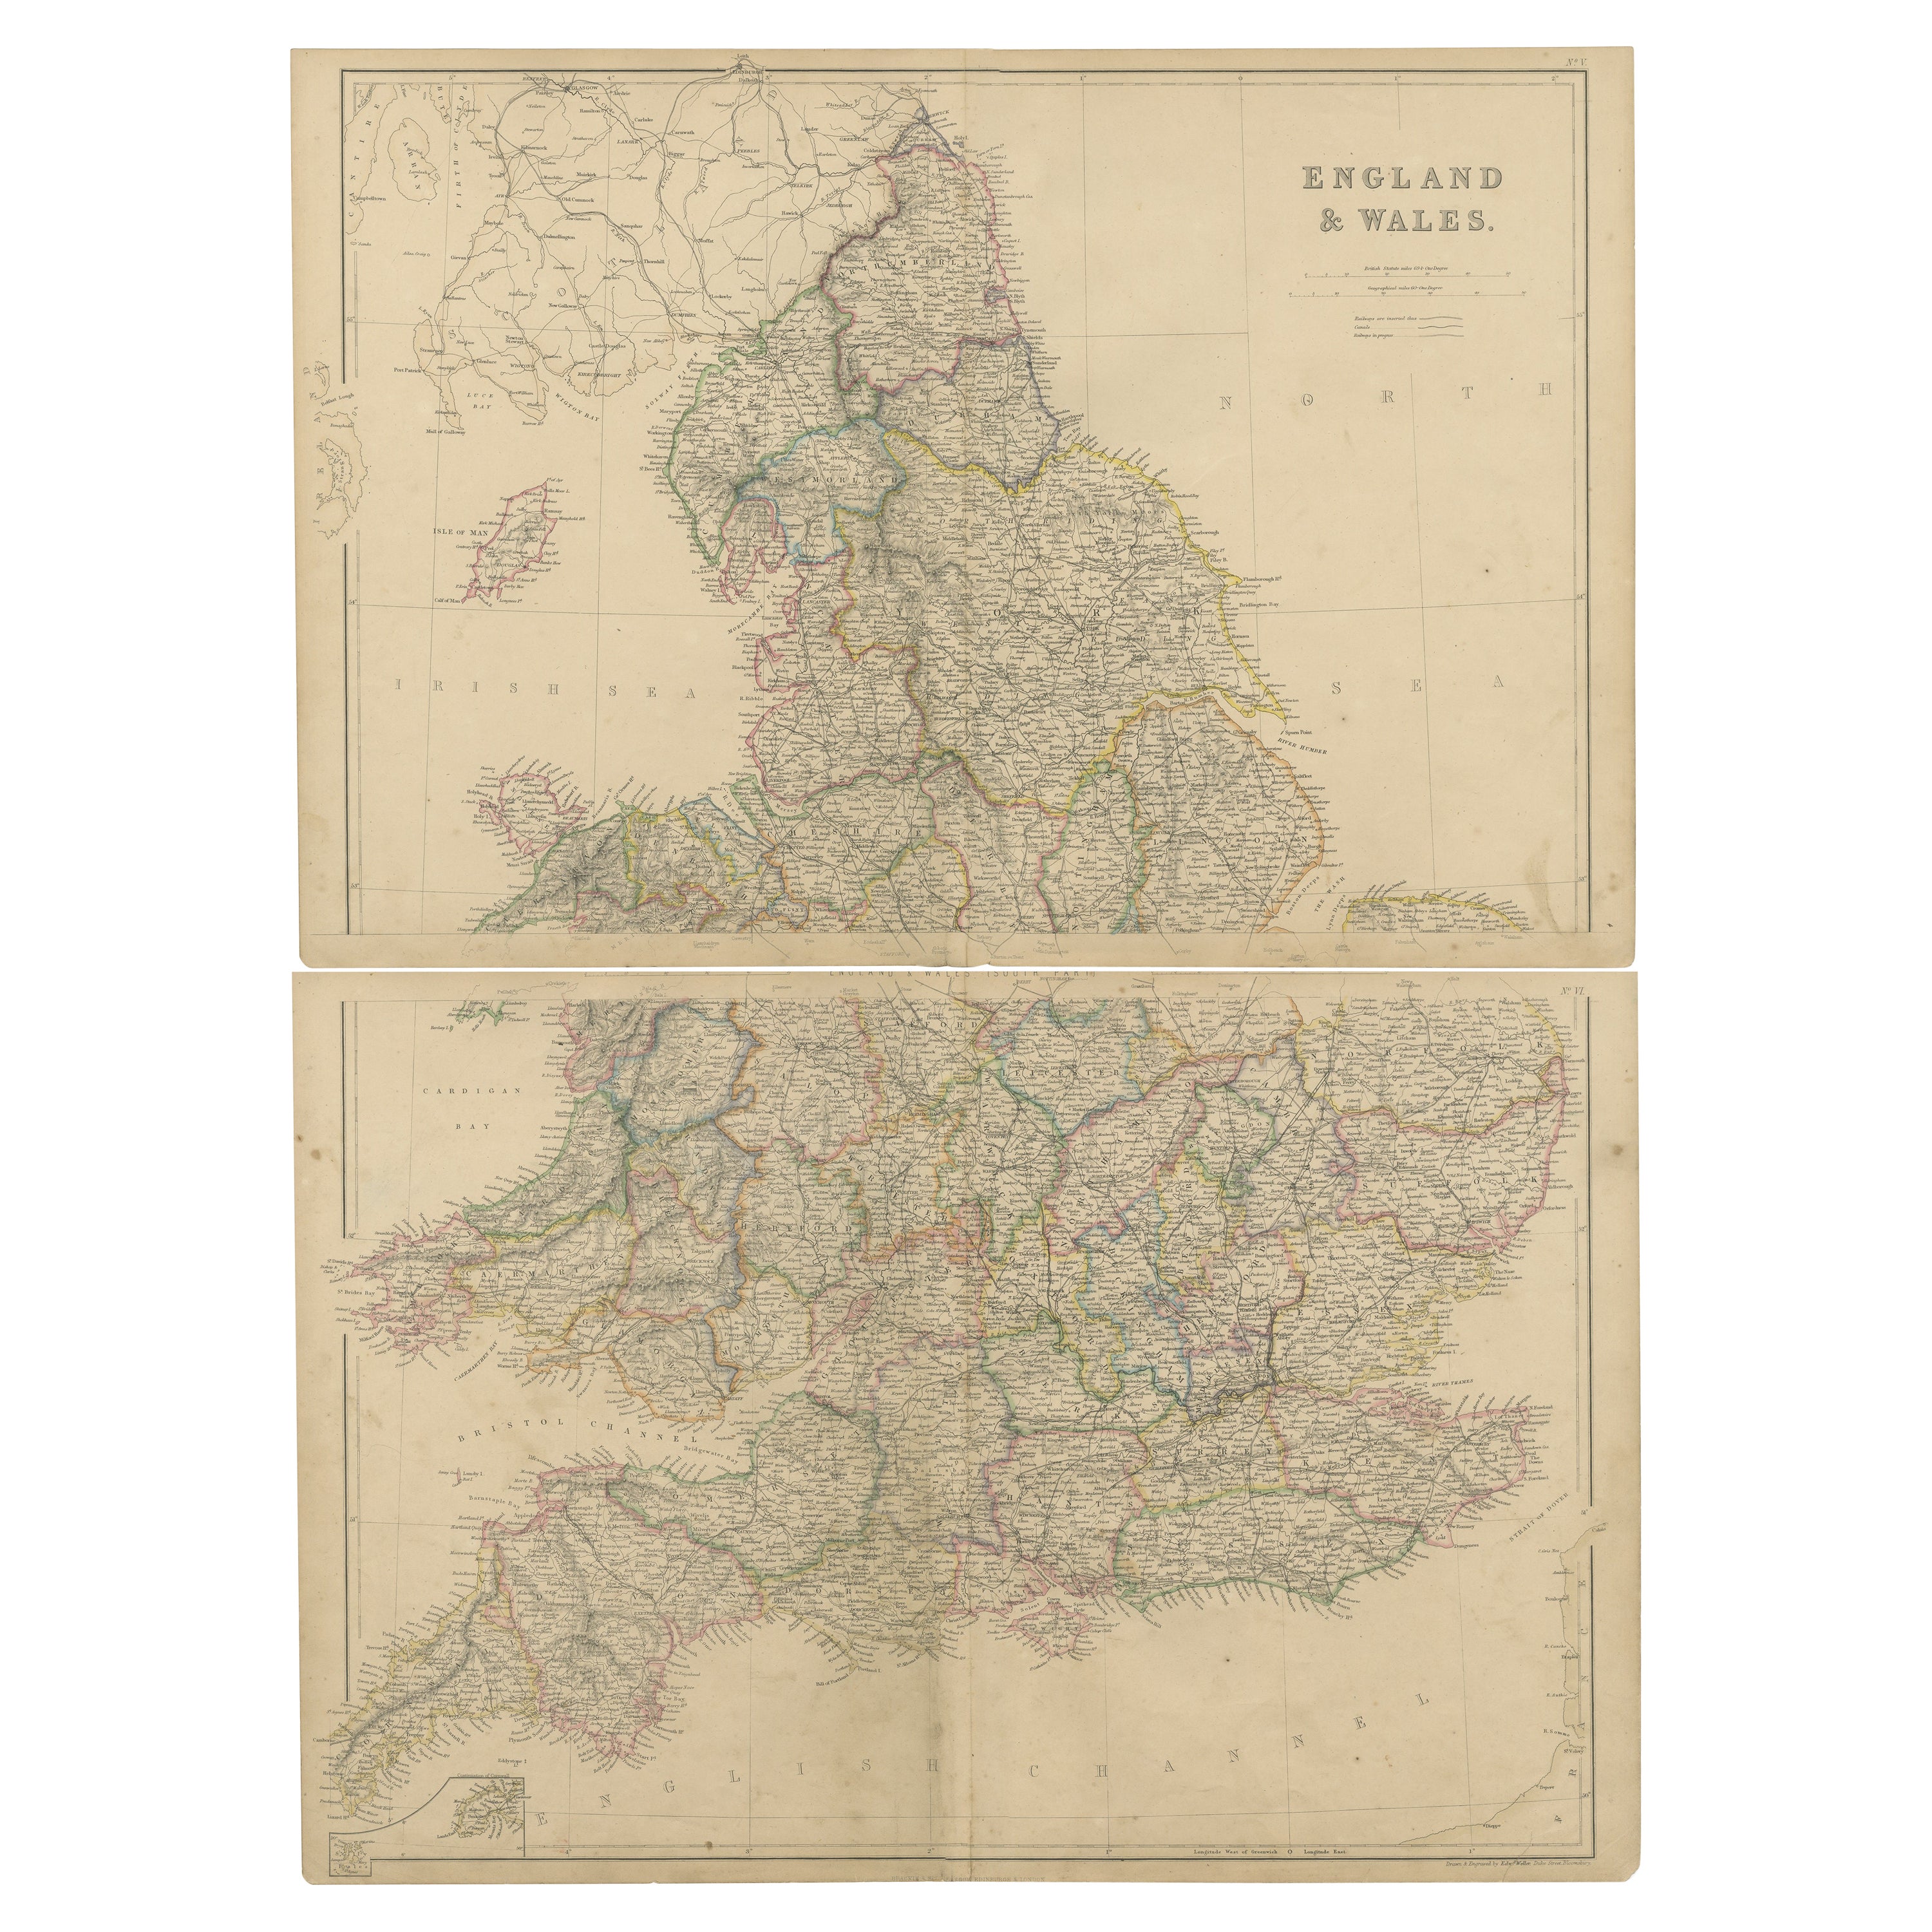 1859 Vintage Maps of England and Wales: Blackie's Imperial Geographic Detail For Sale